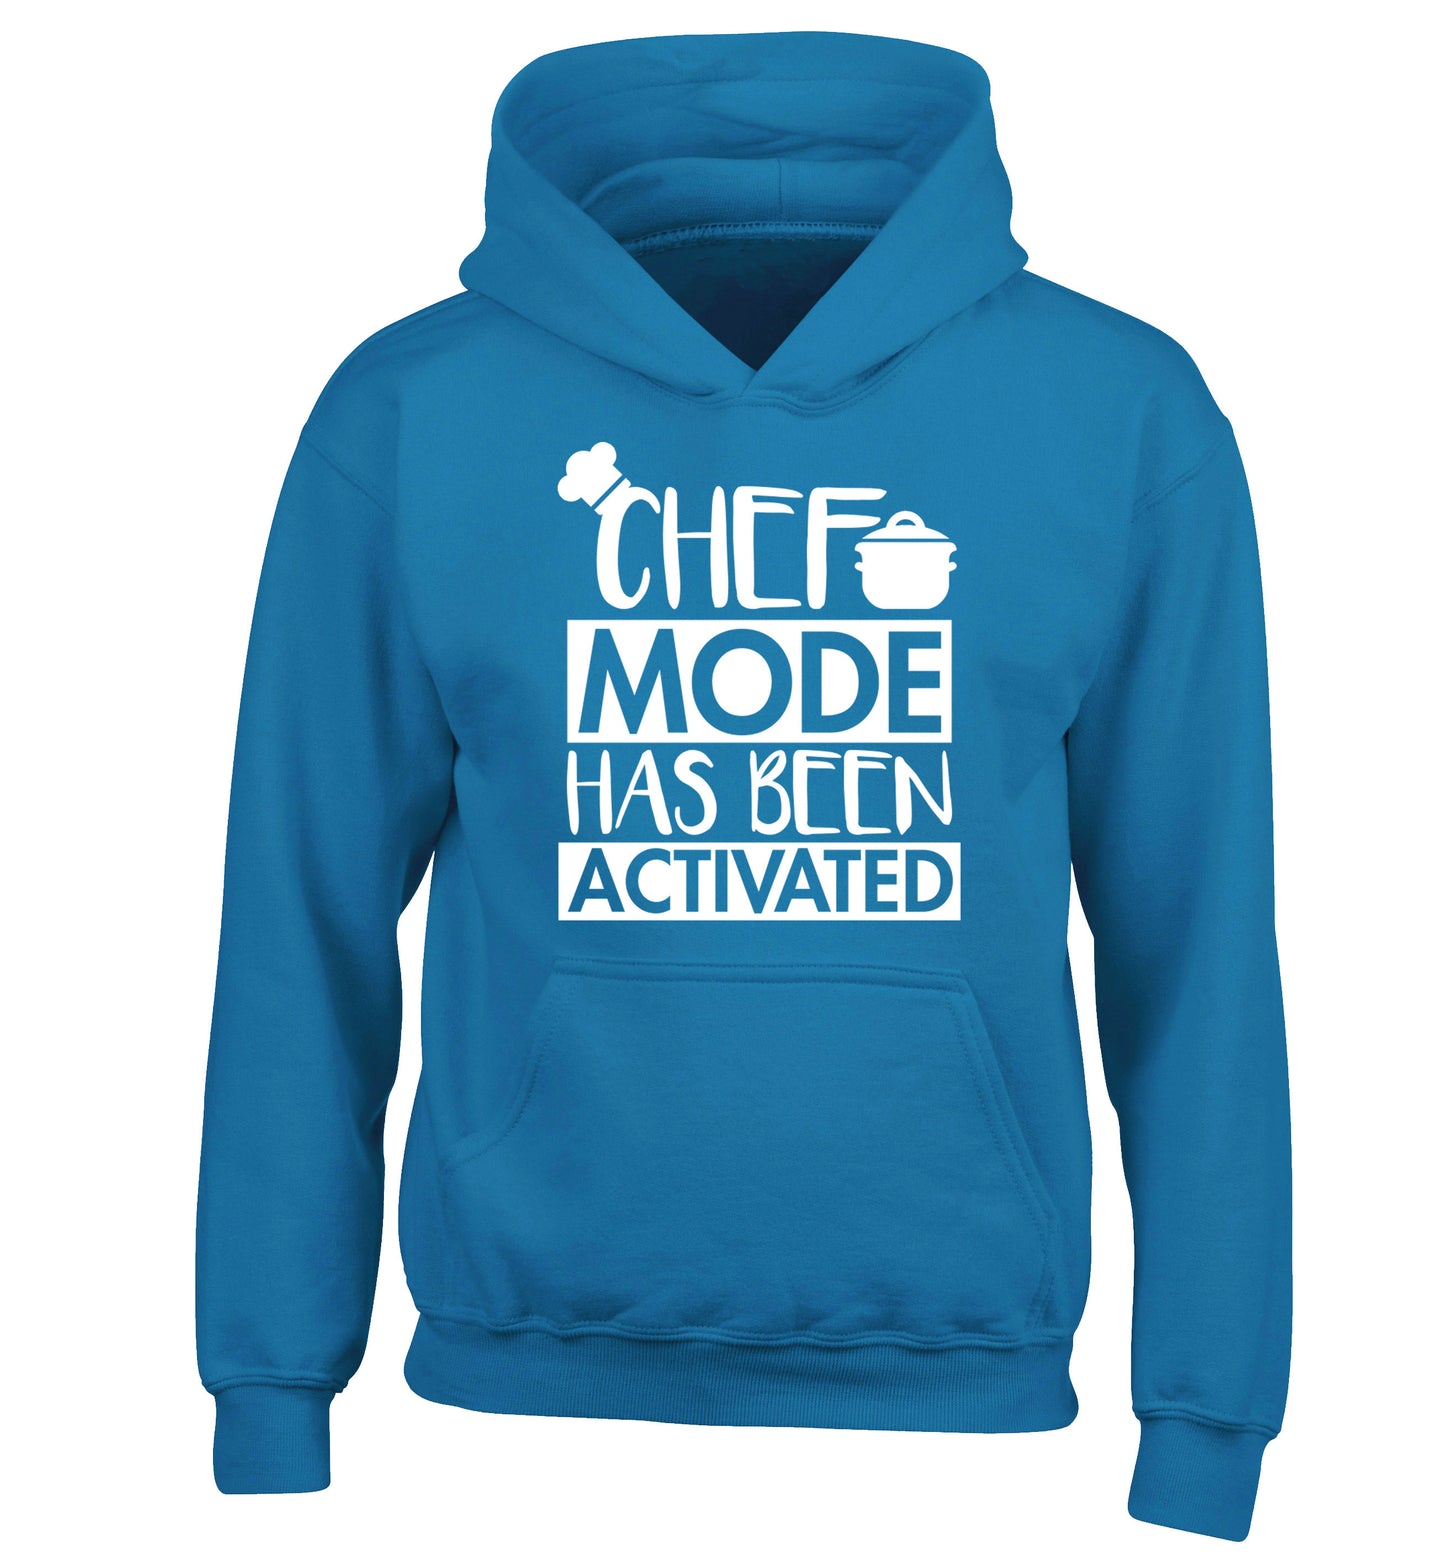 Chef mode has been activated children's blue hoodie 12-14 Years